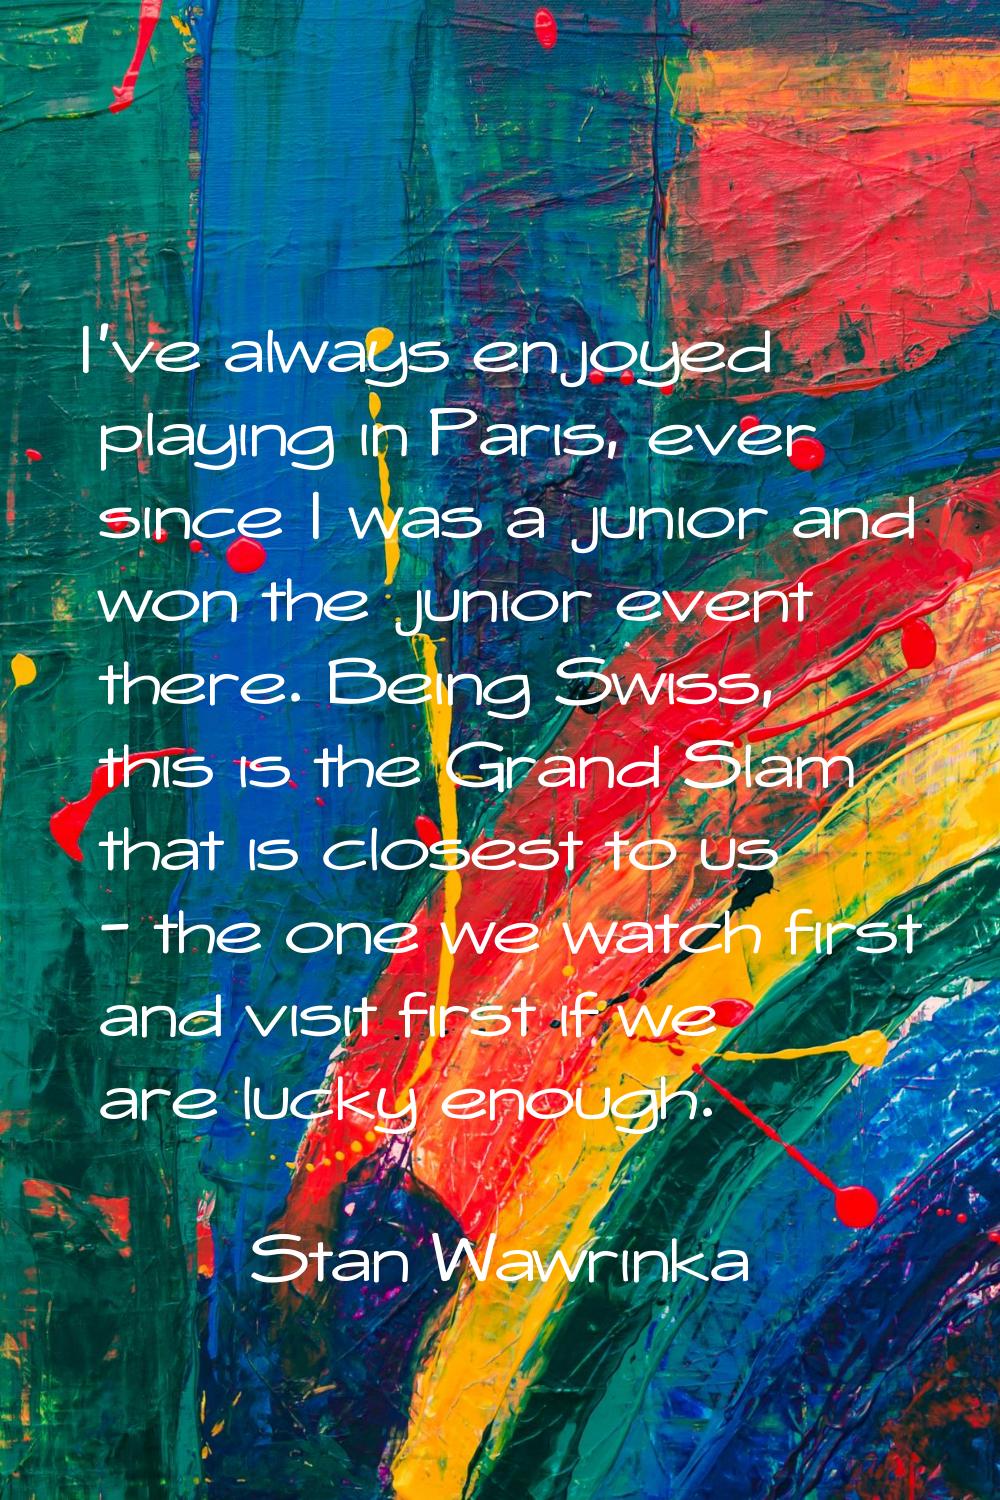 I've always enjoyed playing in Paris, ever since I was a junior and won the junior event there. Bei